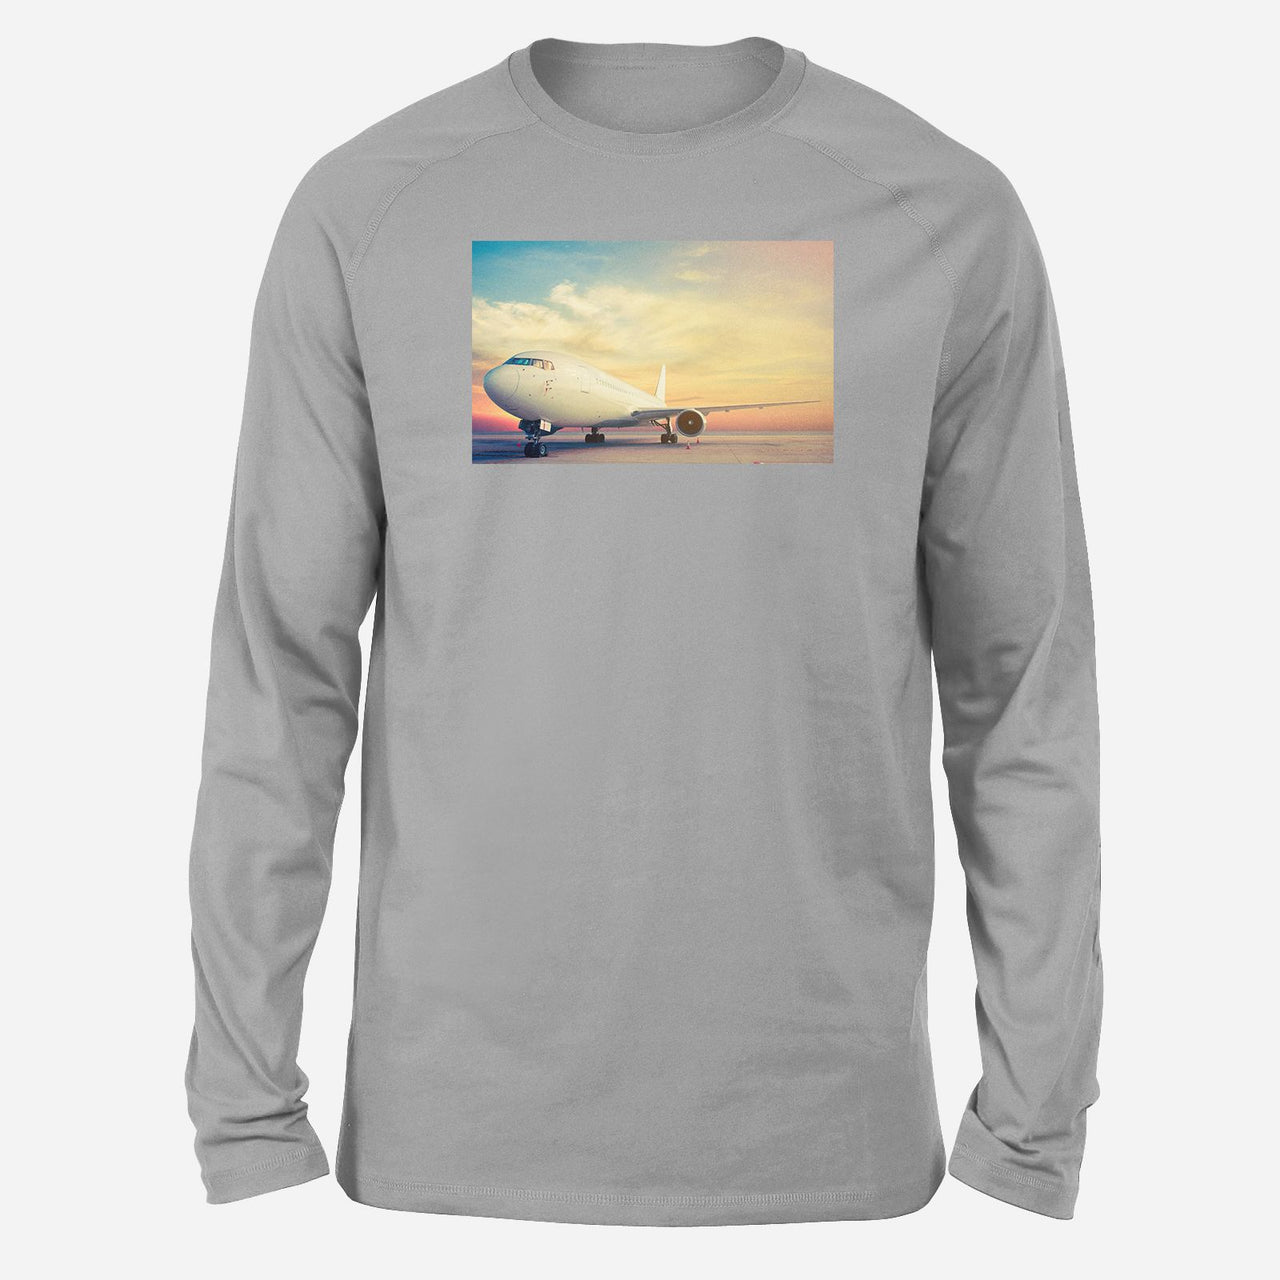 Parked Aircraft During Sunset Designed Long-Sleeve T-Shirts